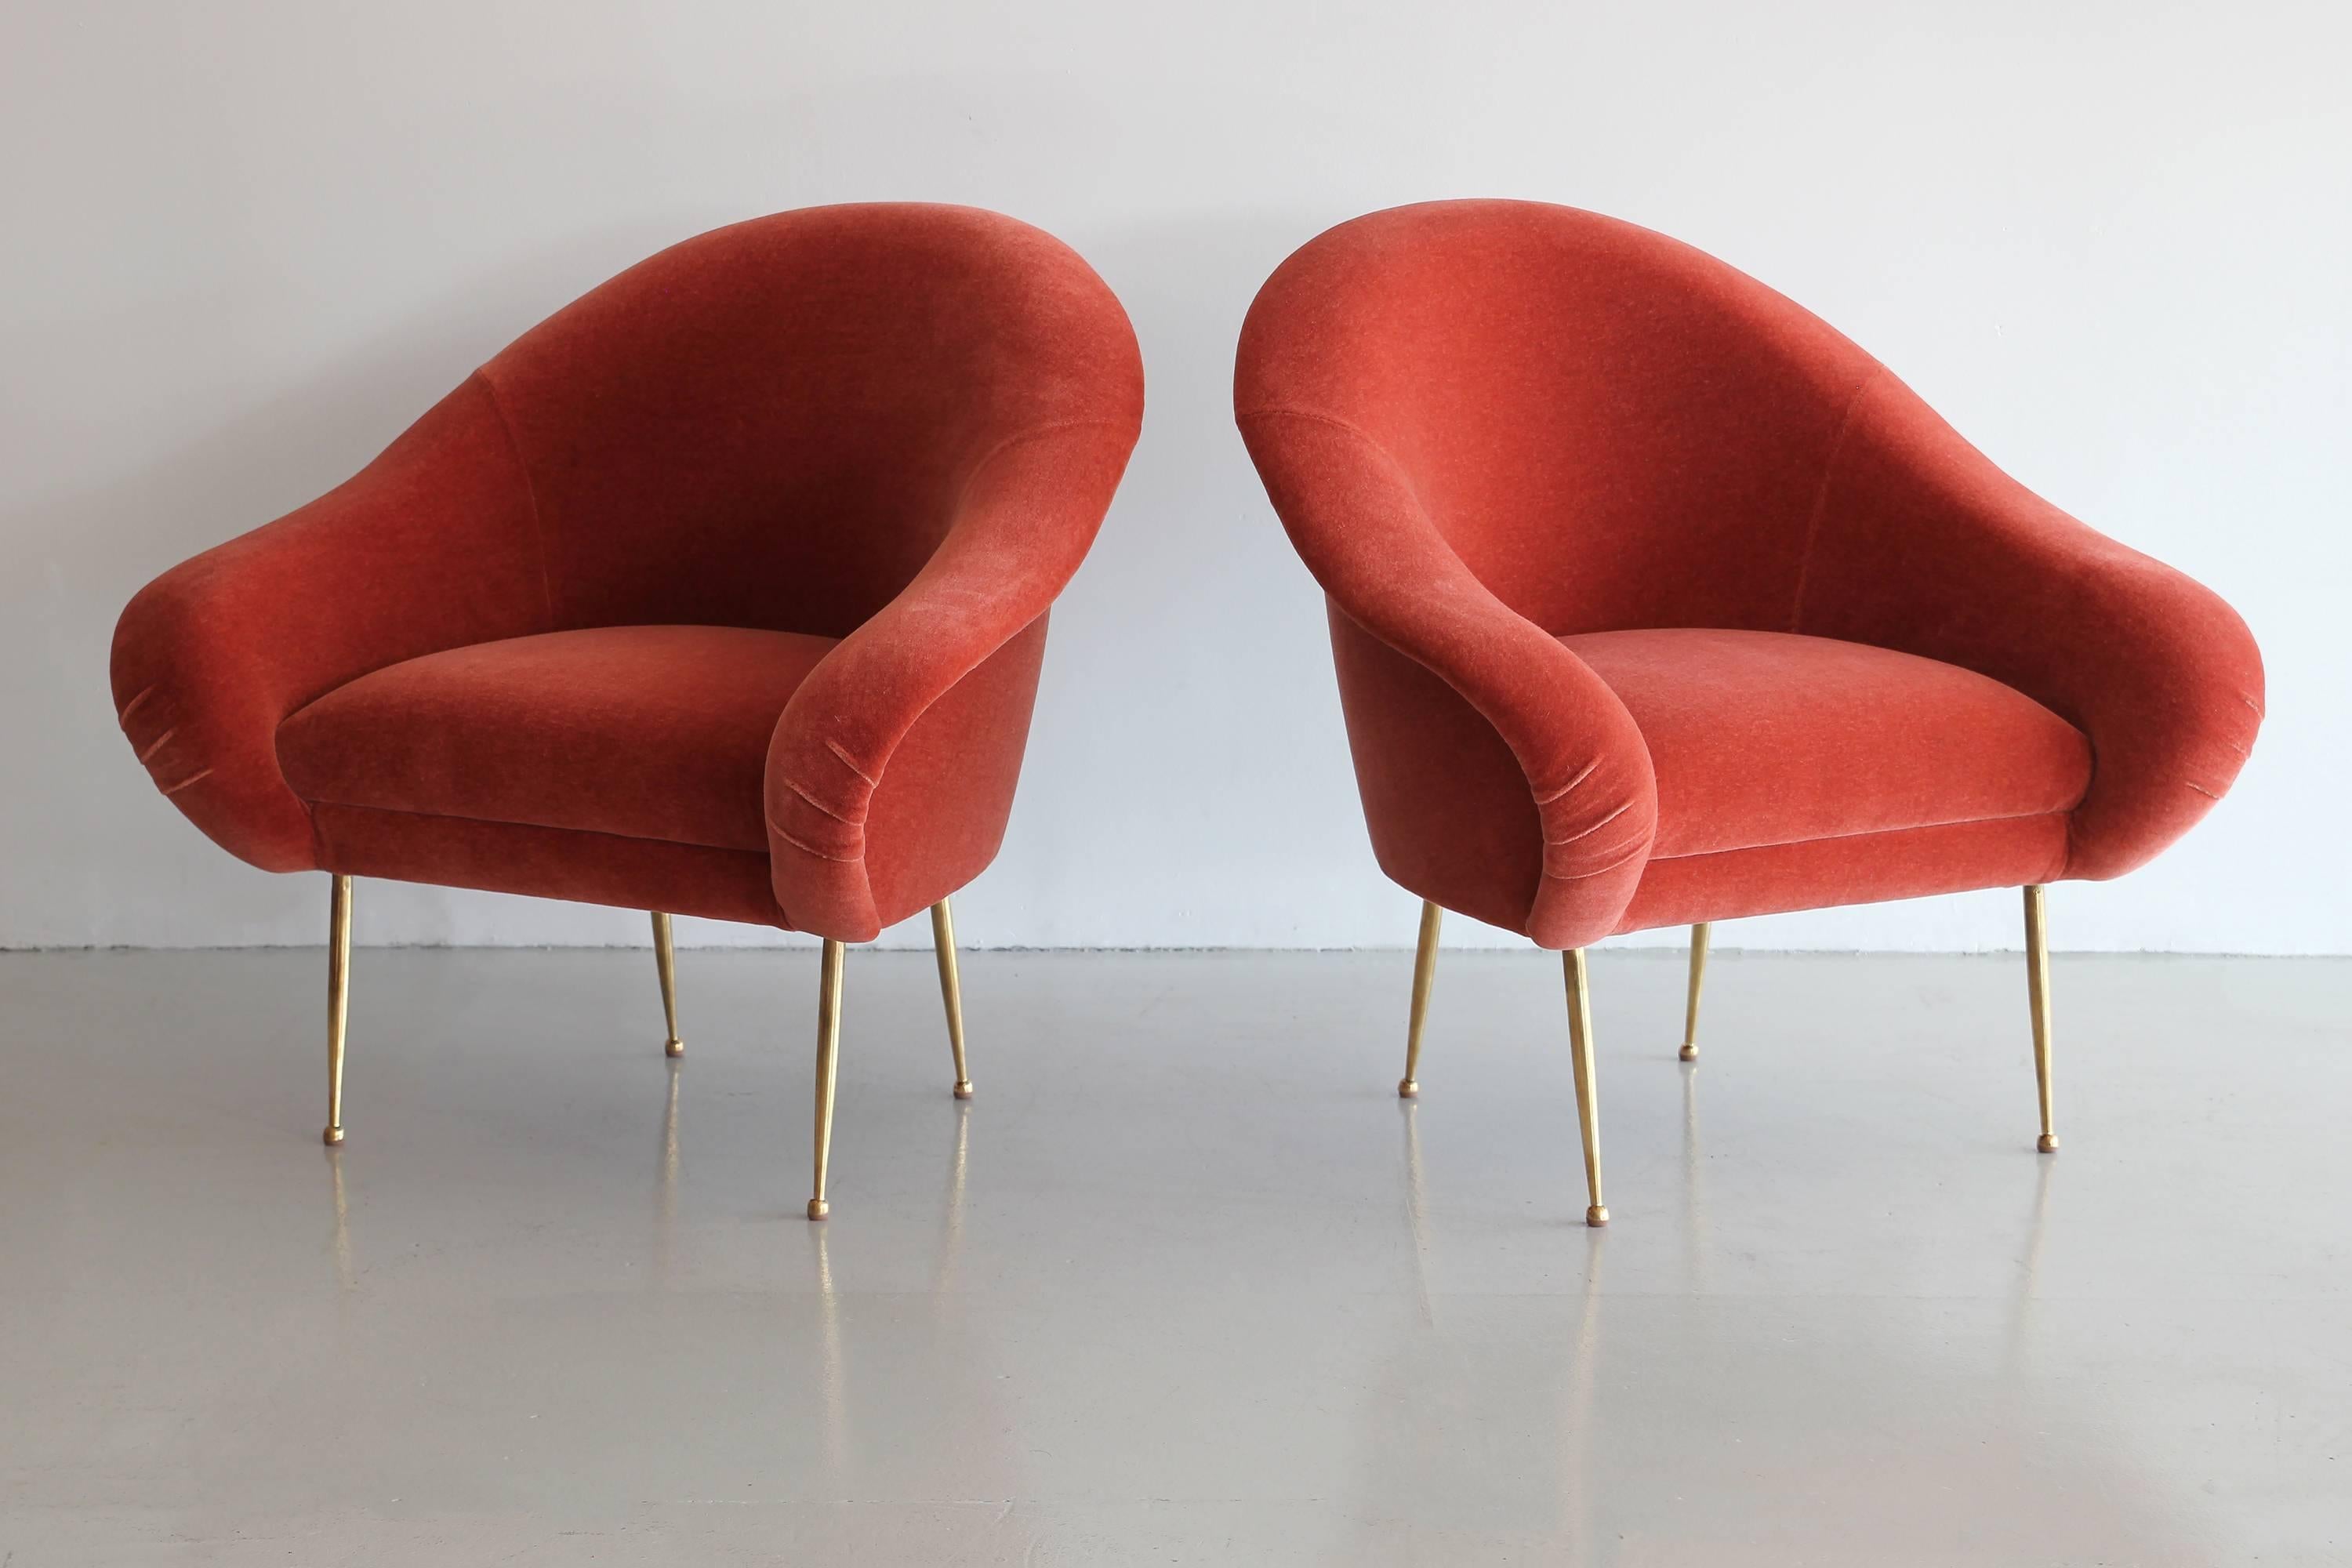 Pair of Italian slipper chairs newly produced by ORANGE with beautiful curved lines and solid brass legs..  
Shown in burnt orange mohair and priced COM.   
